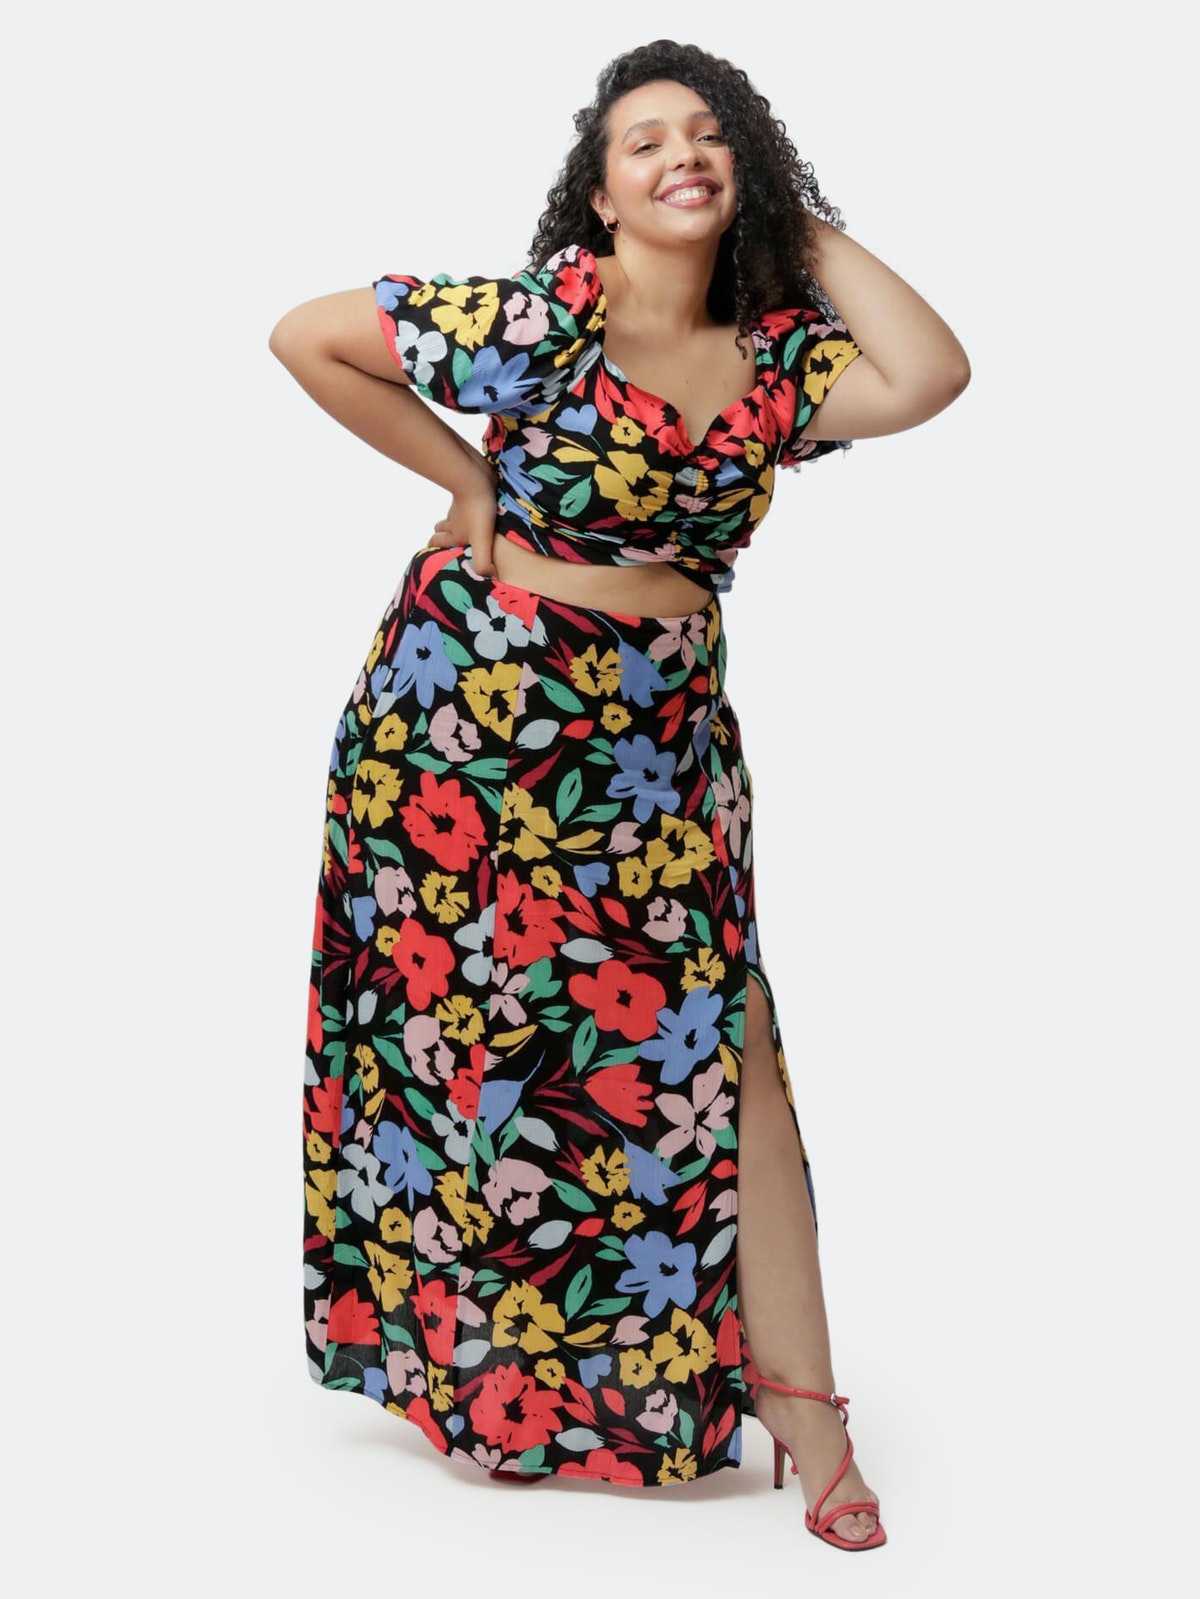 Top Plus Size 2021 Spring Fashion Trends & Where To Shop Them